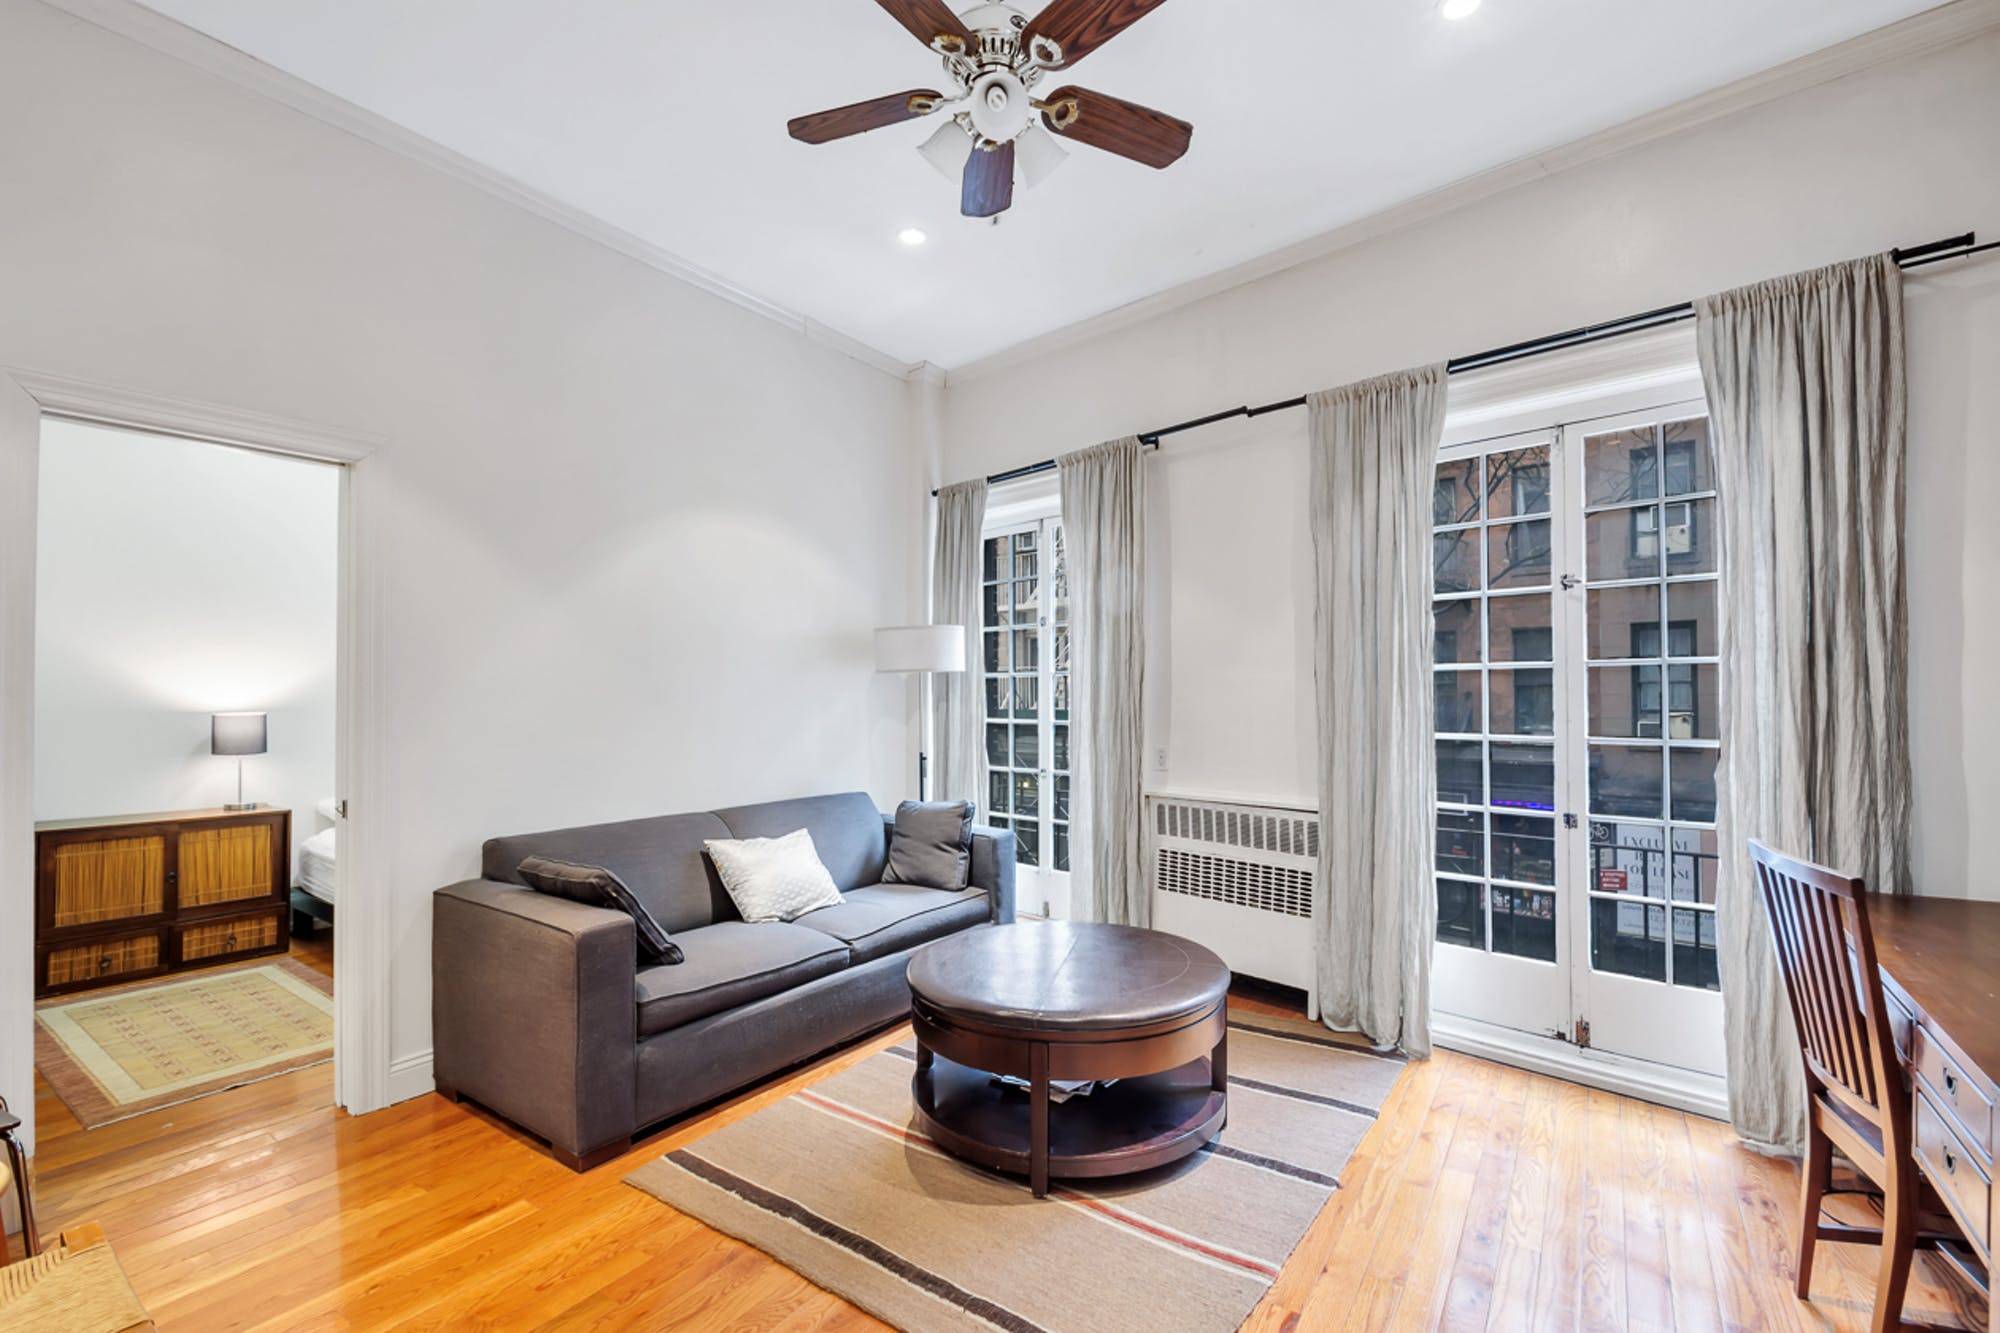 Renovated spacious 1 bedroom available at 112 Christopher Street in the West Village.